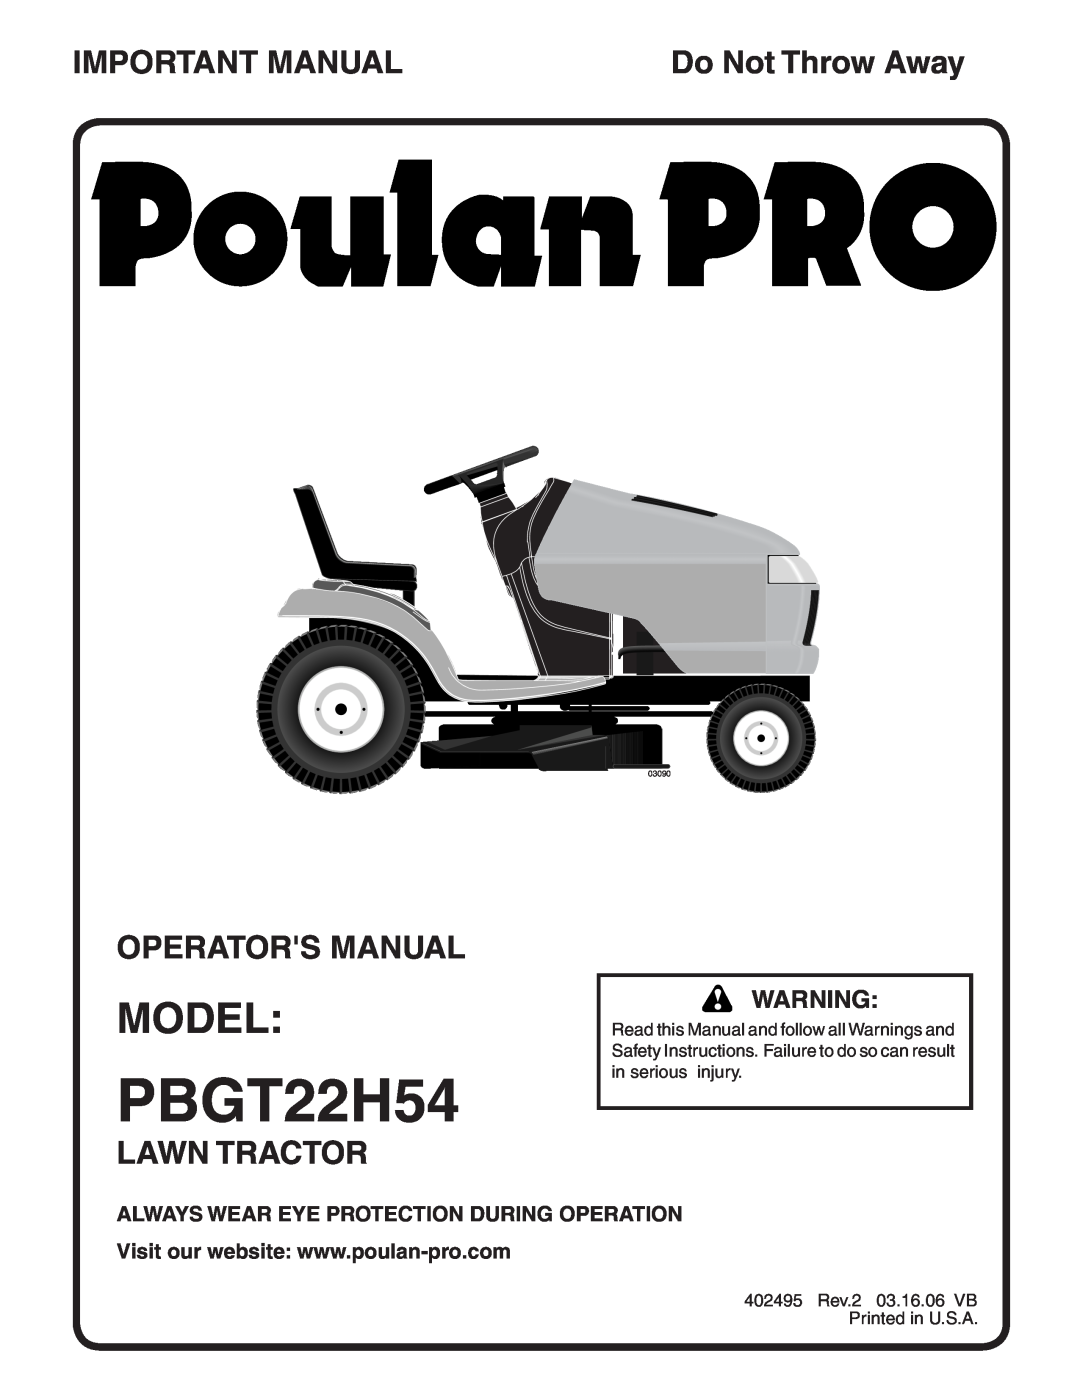 Poulan 402495 manual Model, Important Manual, Operators Manual, Lawn Tractor, Always Wear Eye Protection During Operation 